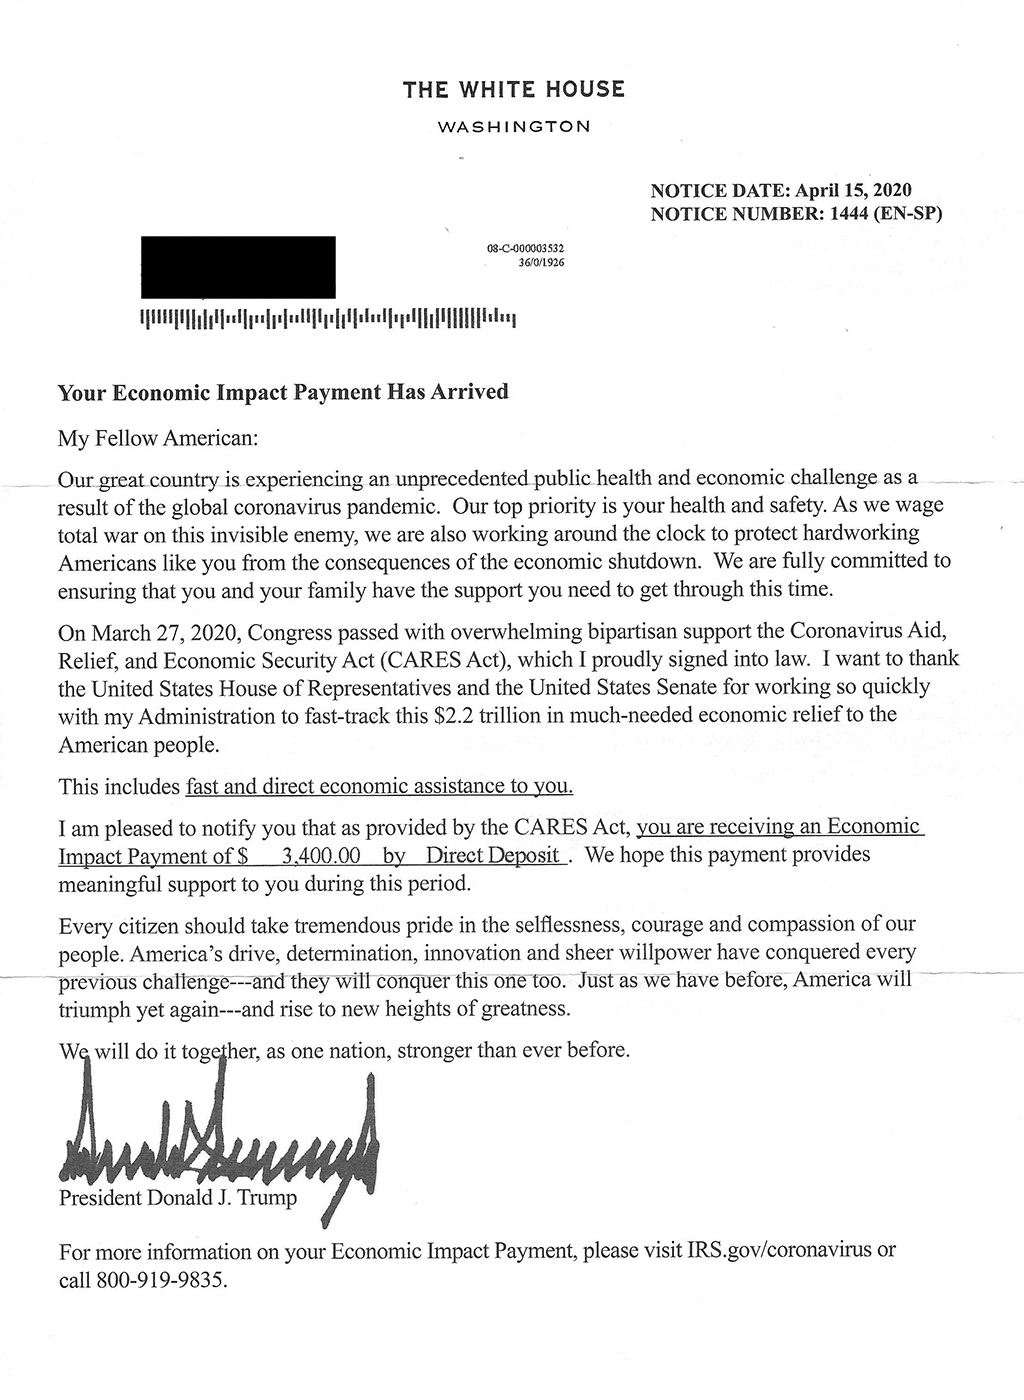 Stimulus Letter From The White House